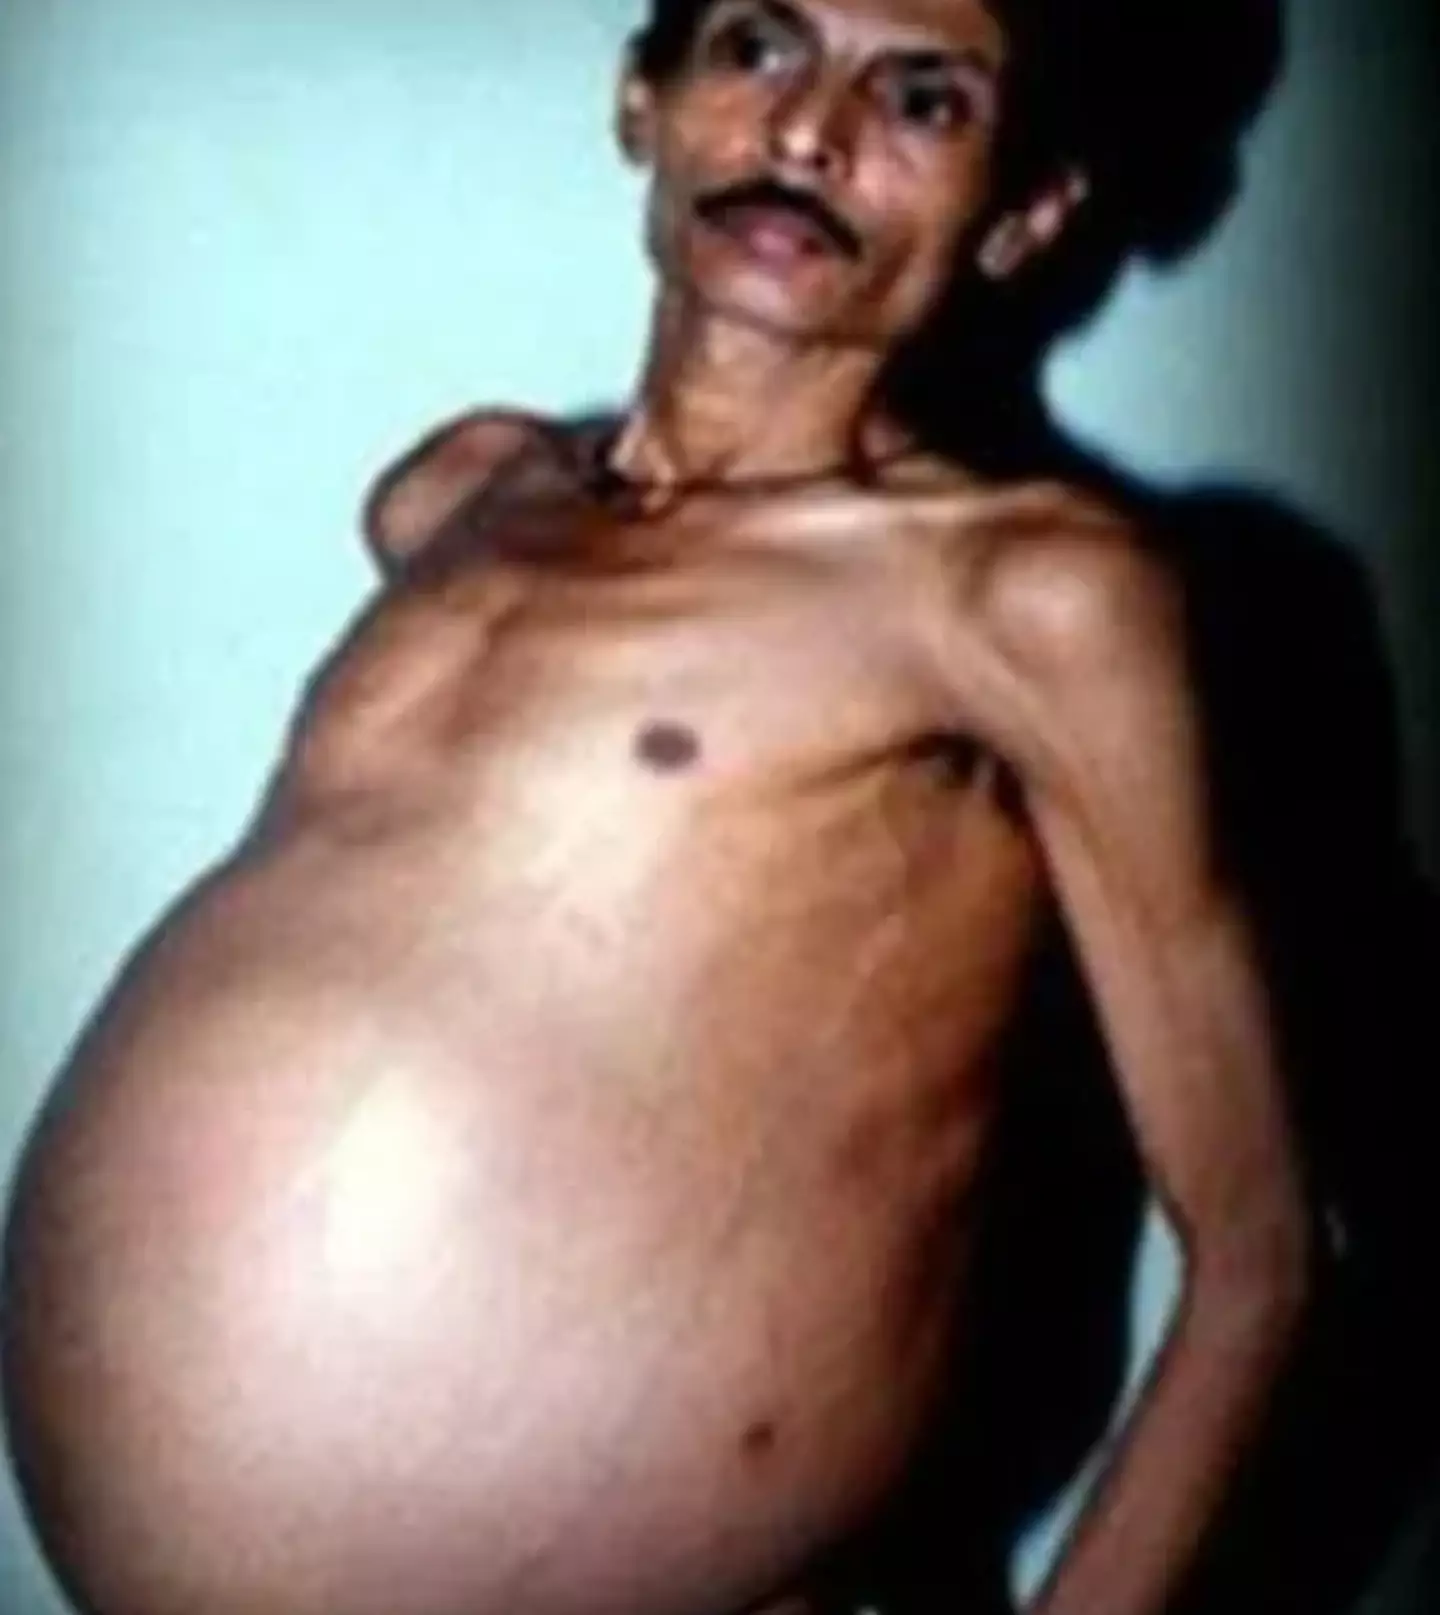 Bhagat's twin had been living off the contents of his stomach as a 'parasite'.